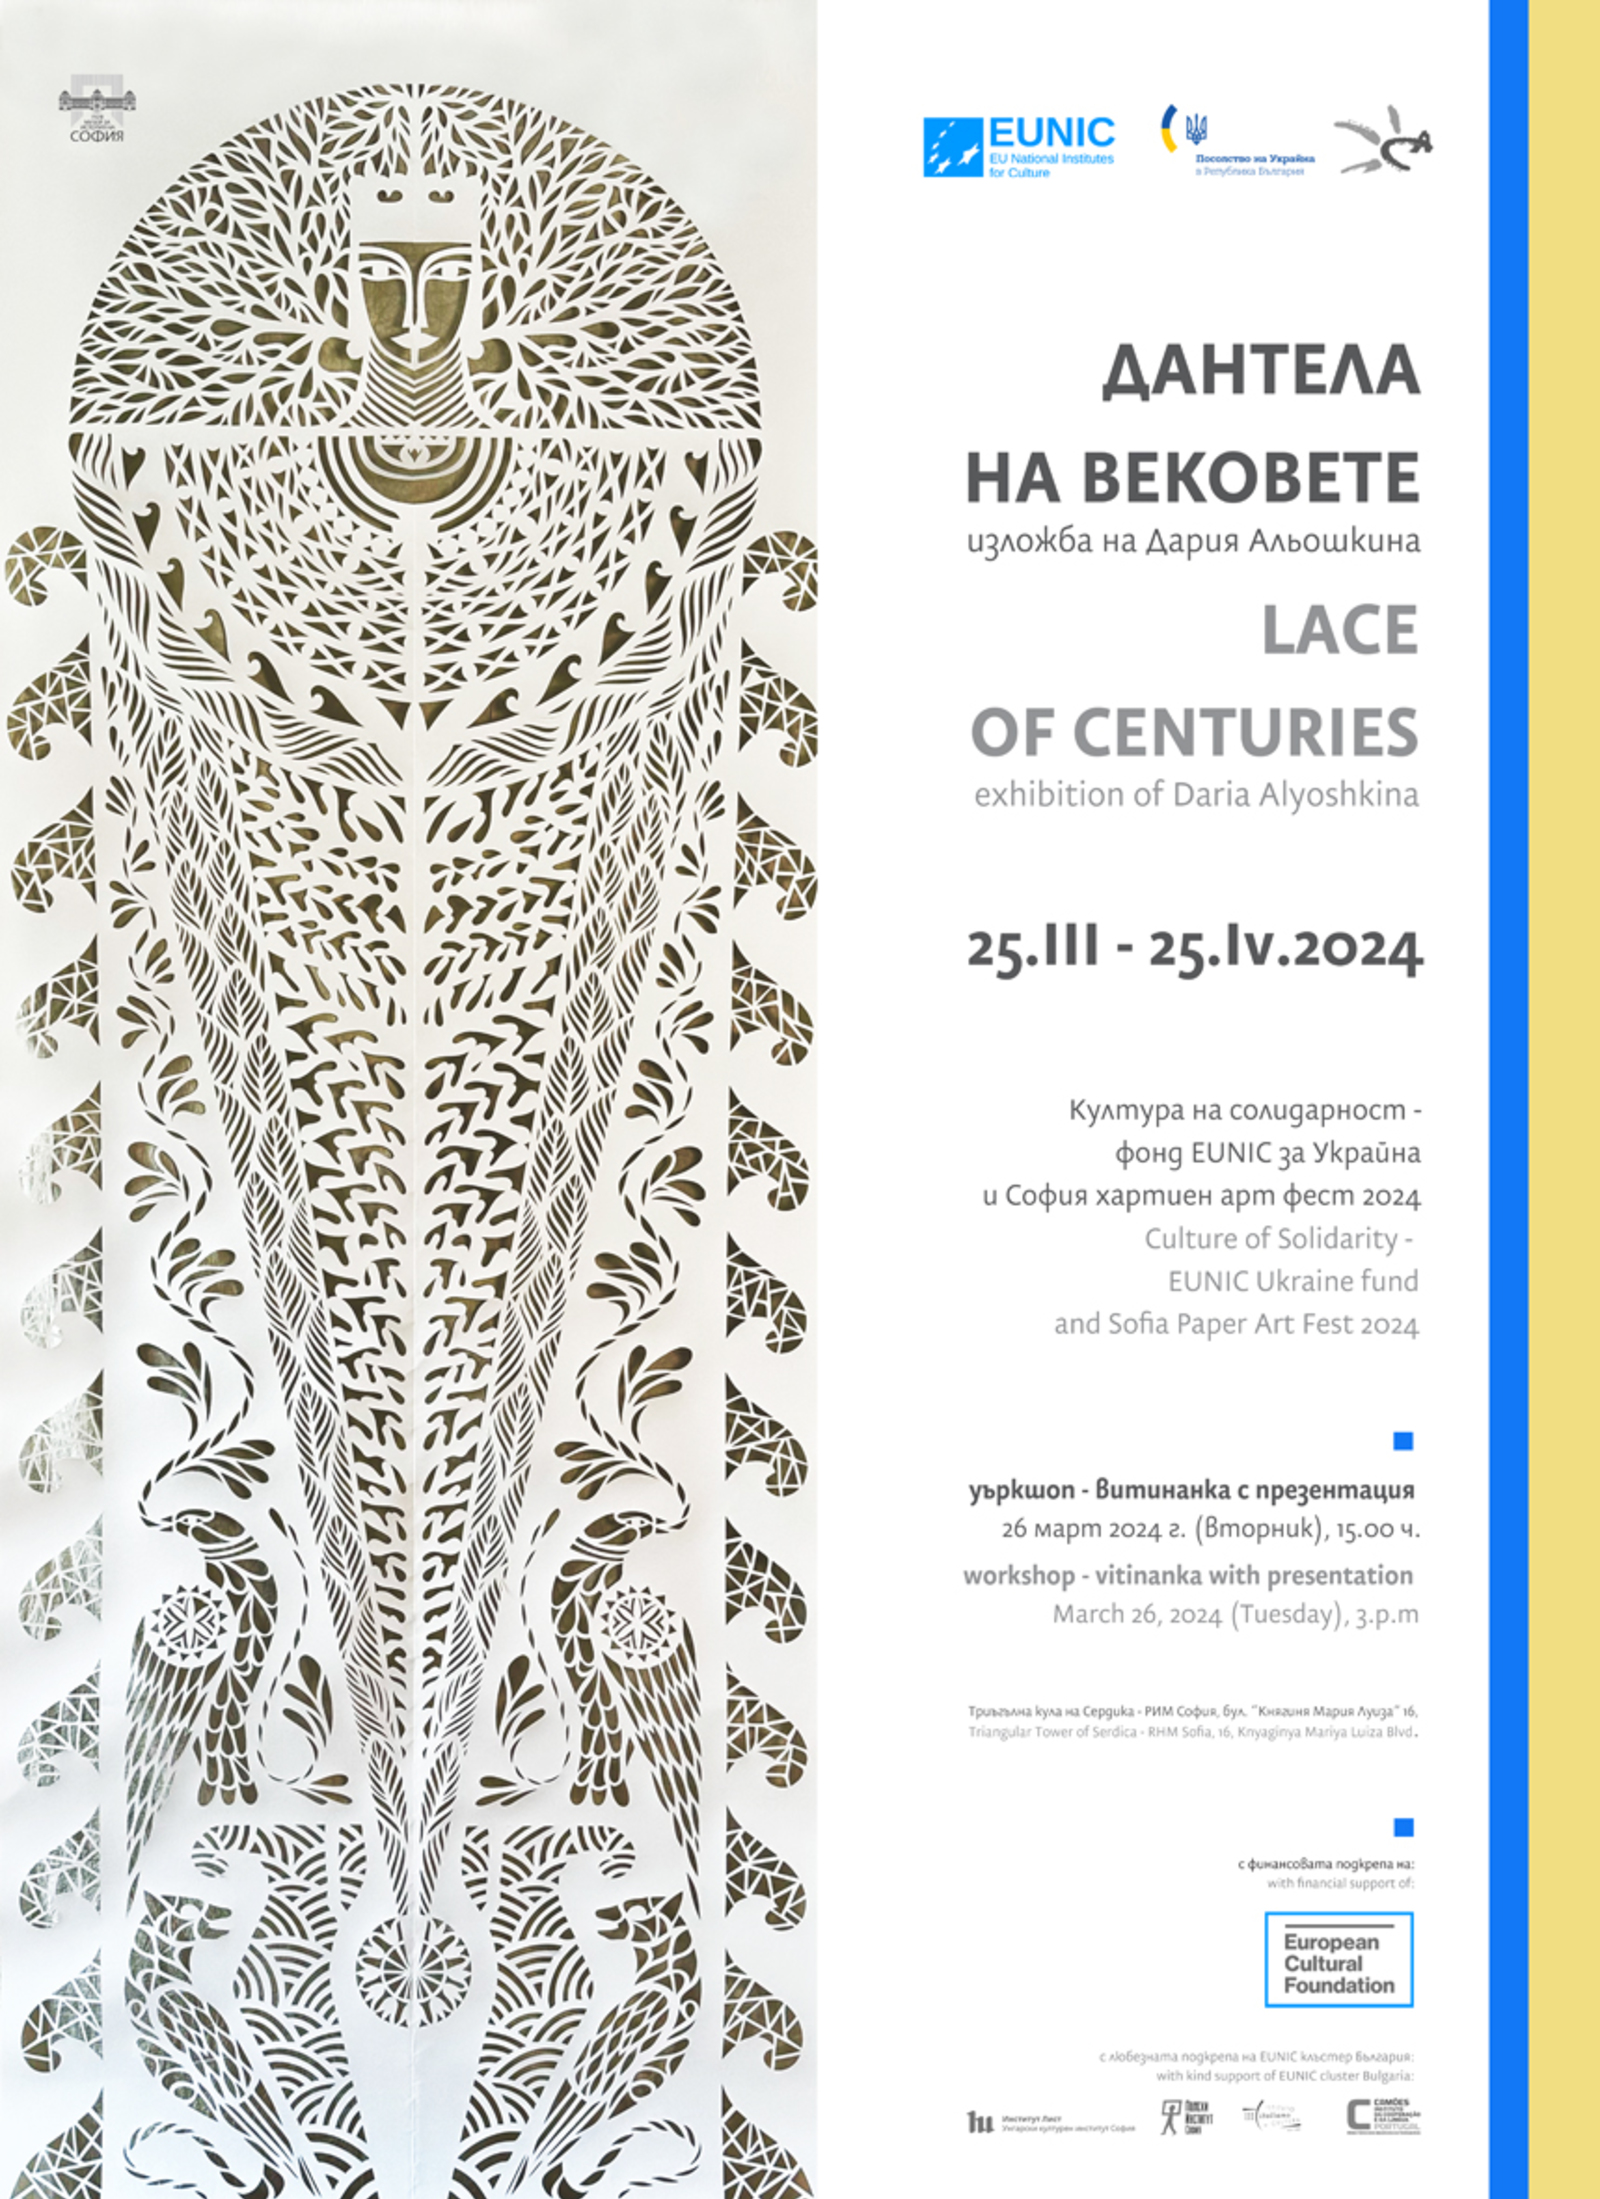 The exhibition "Lace of the Centuries" by the Ukrainian artist Daria Alyoshkina will open the Sofia Paper Art Fest 2024